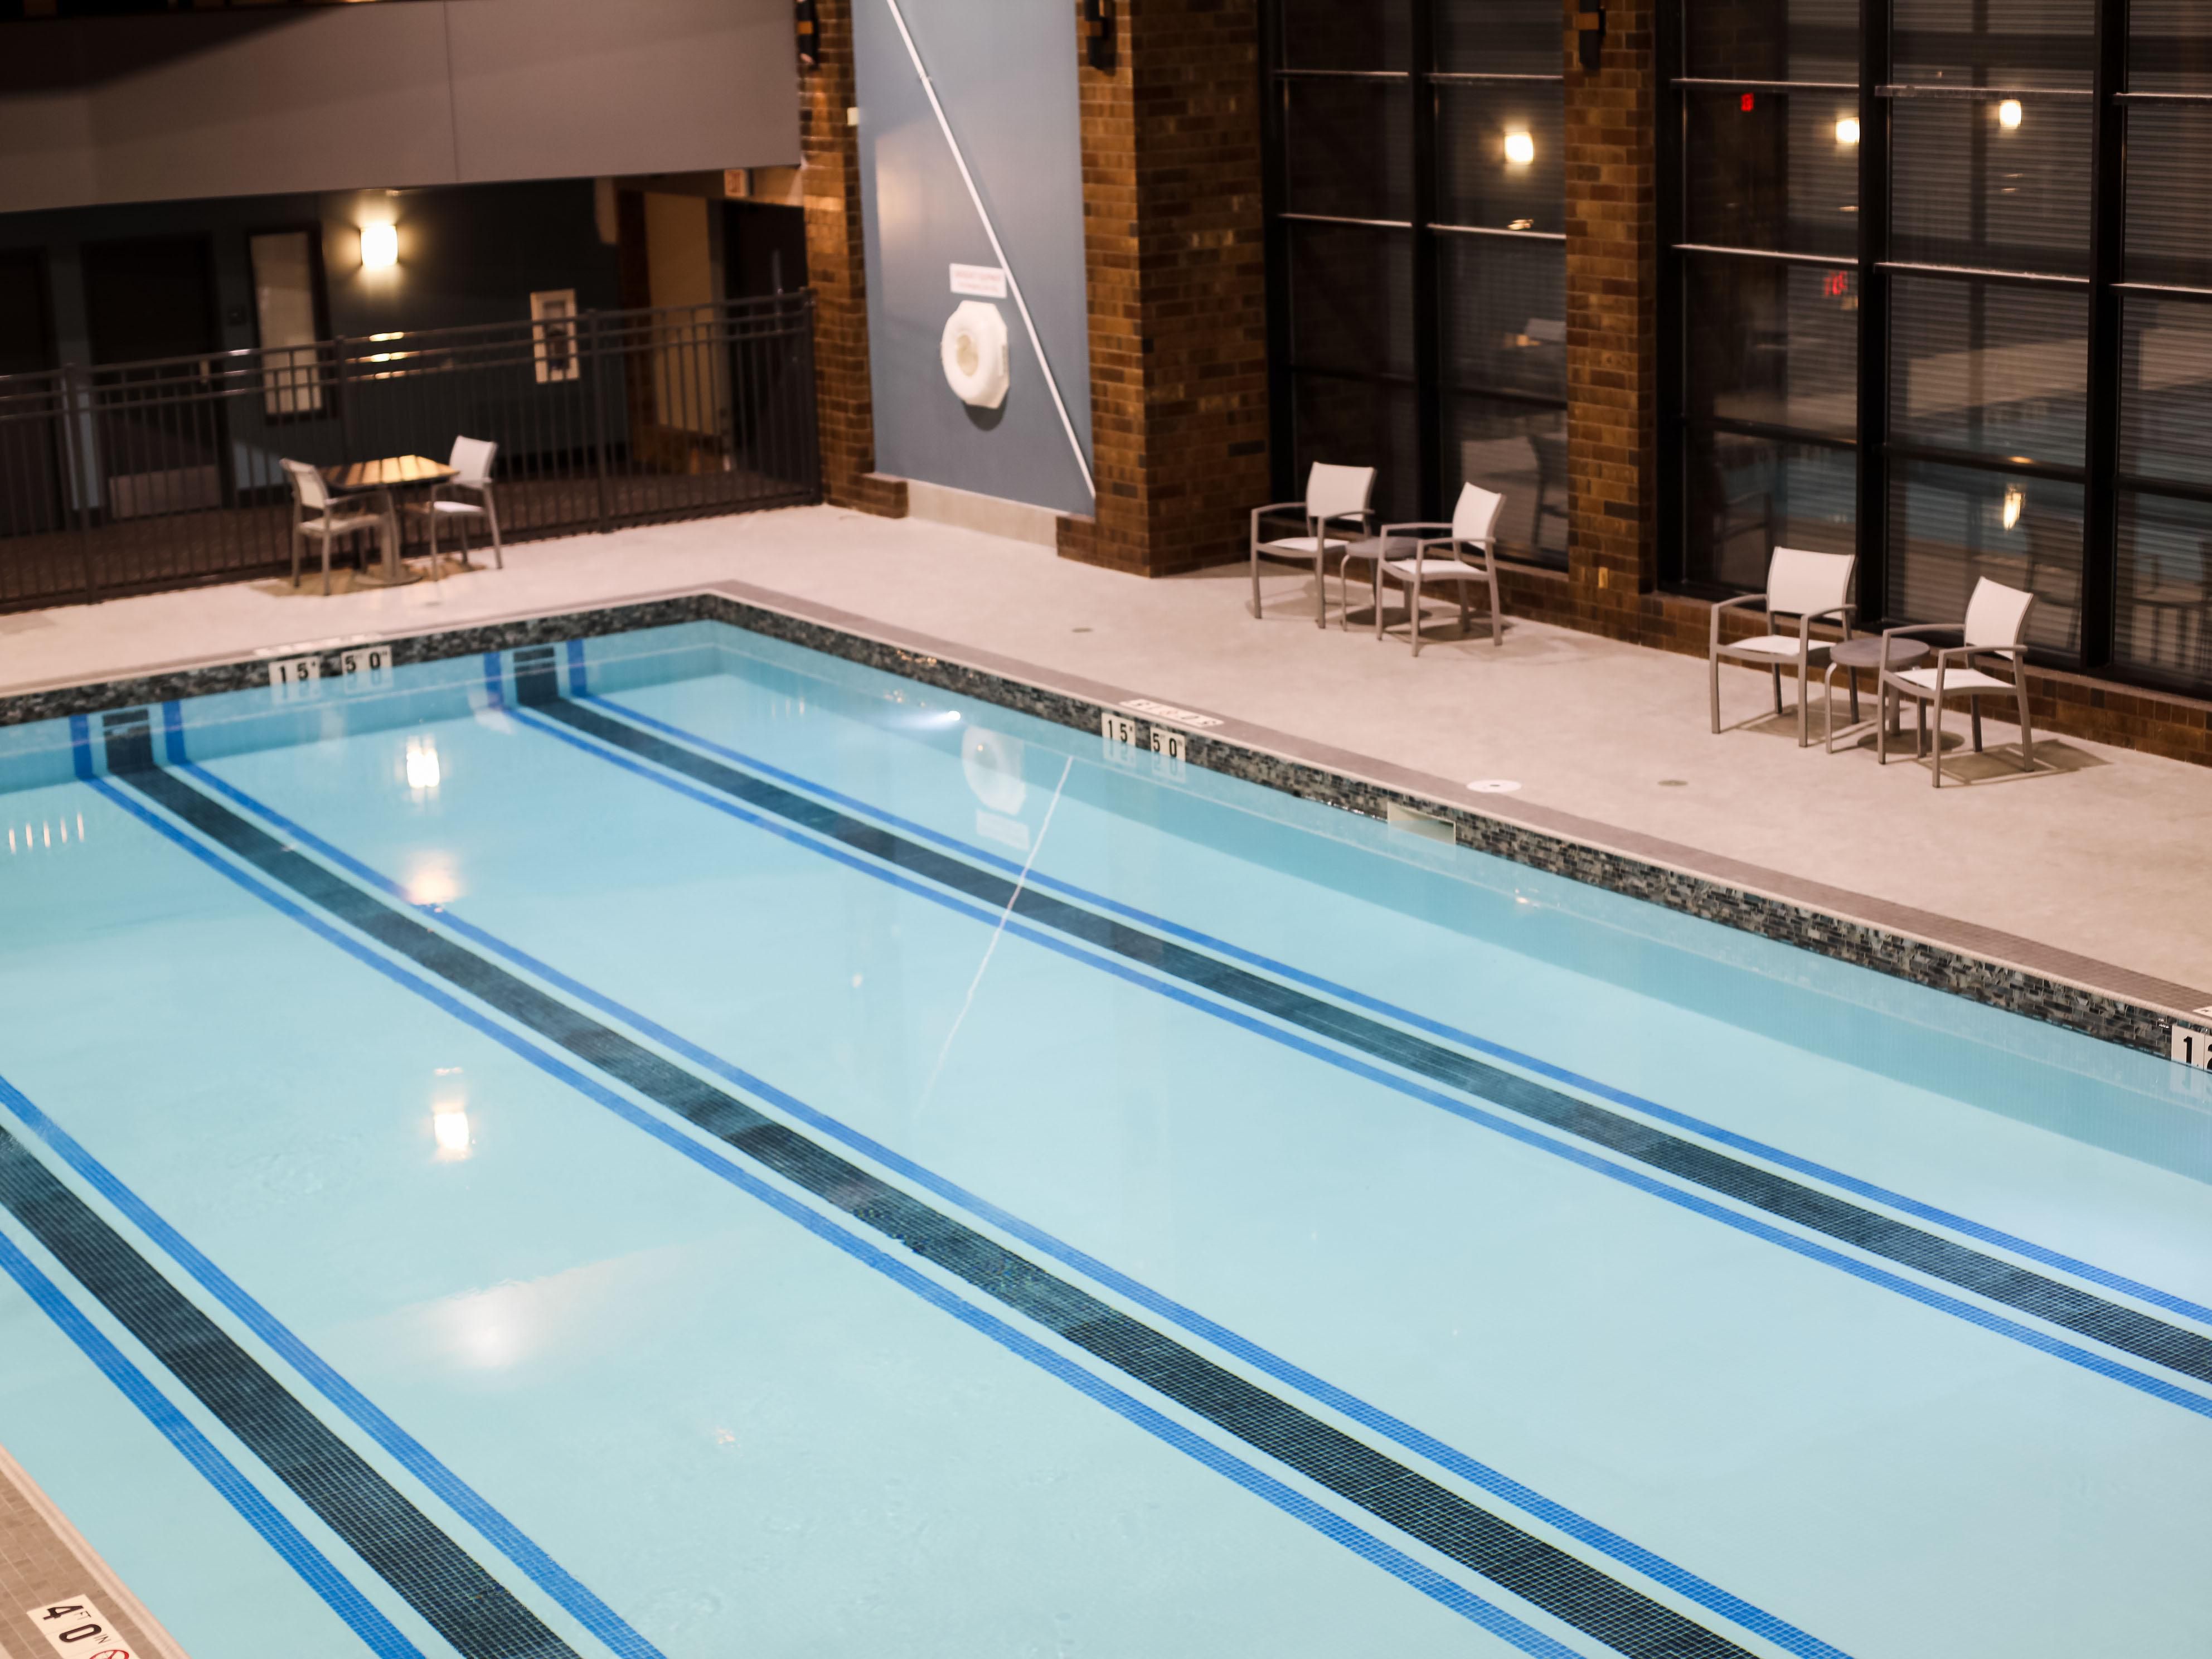 Kick back and relax while the stress of the day fades away. We know a hotel with a pool is important to you, and we are proud to offer not just one pool, but three indoor pools! 